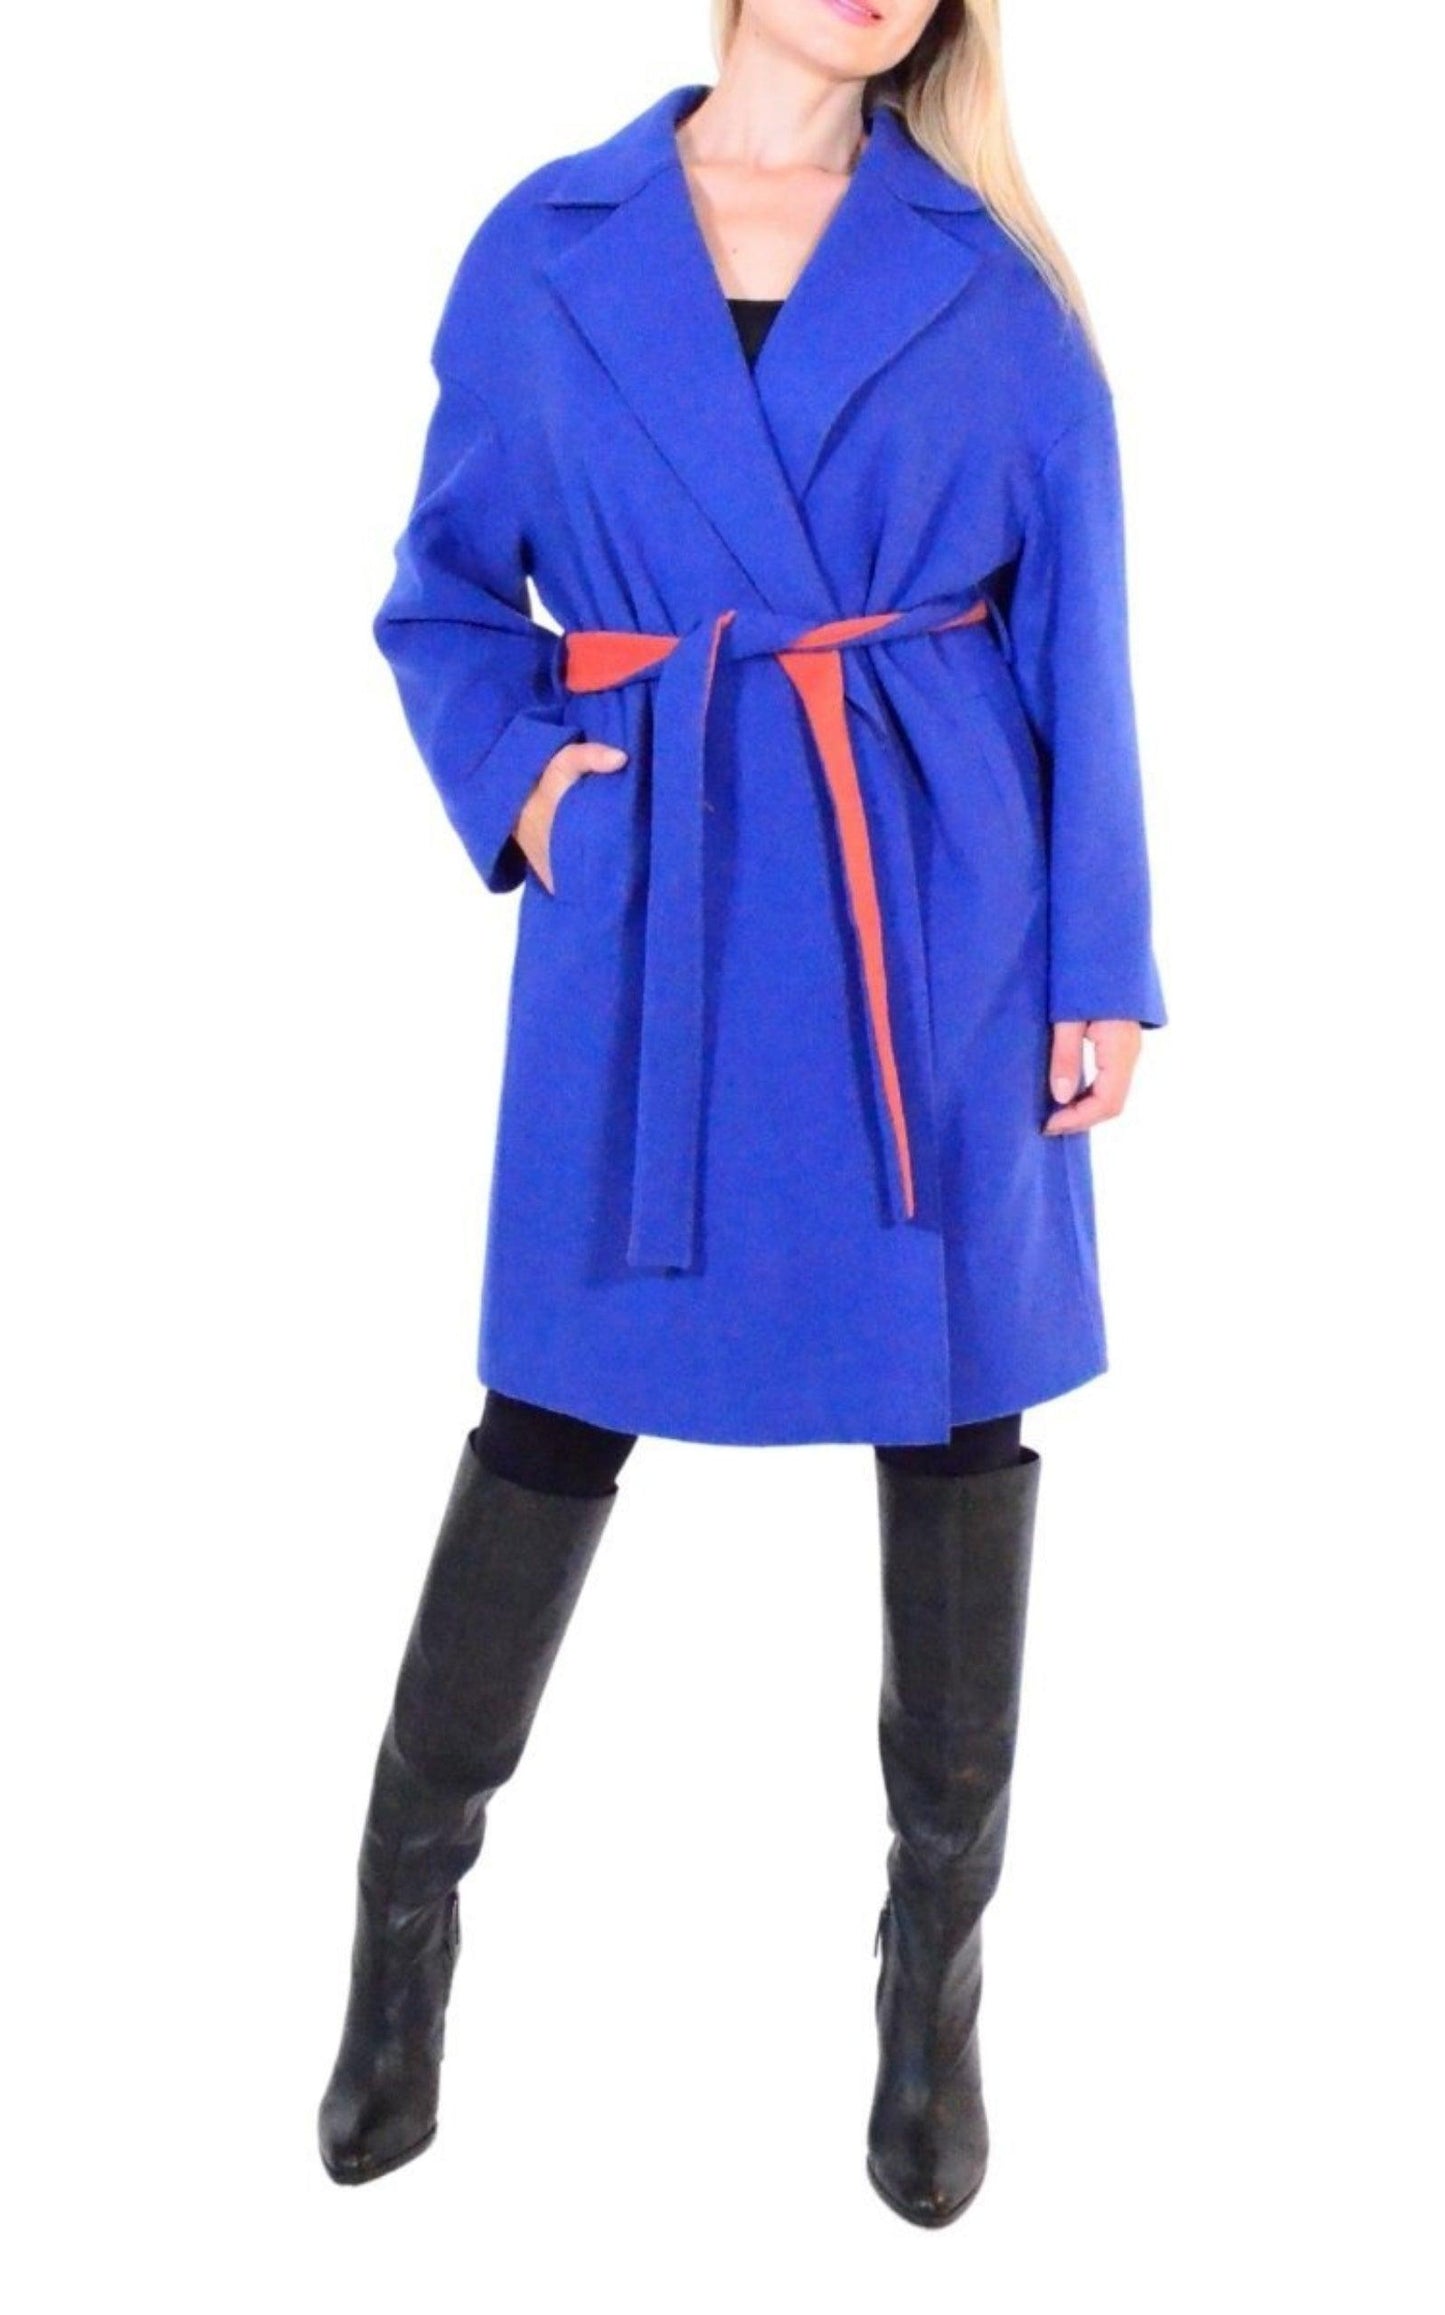  Cult ModaBlue Belted Wrap Trench Coat - Runway Catalog